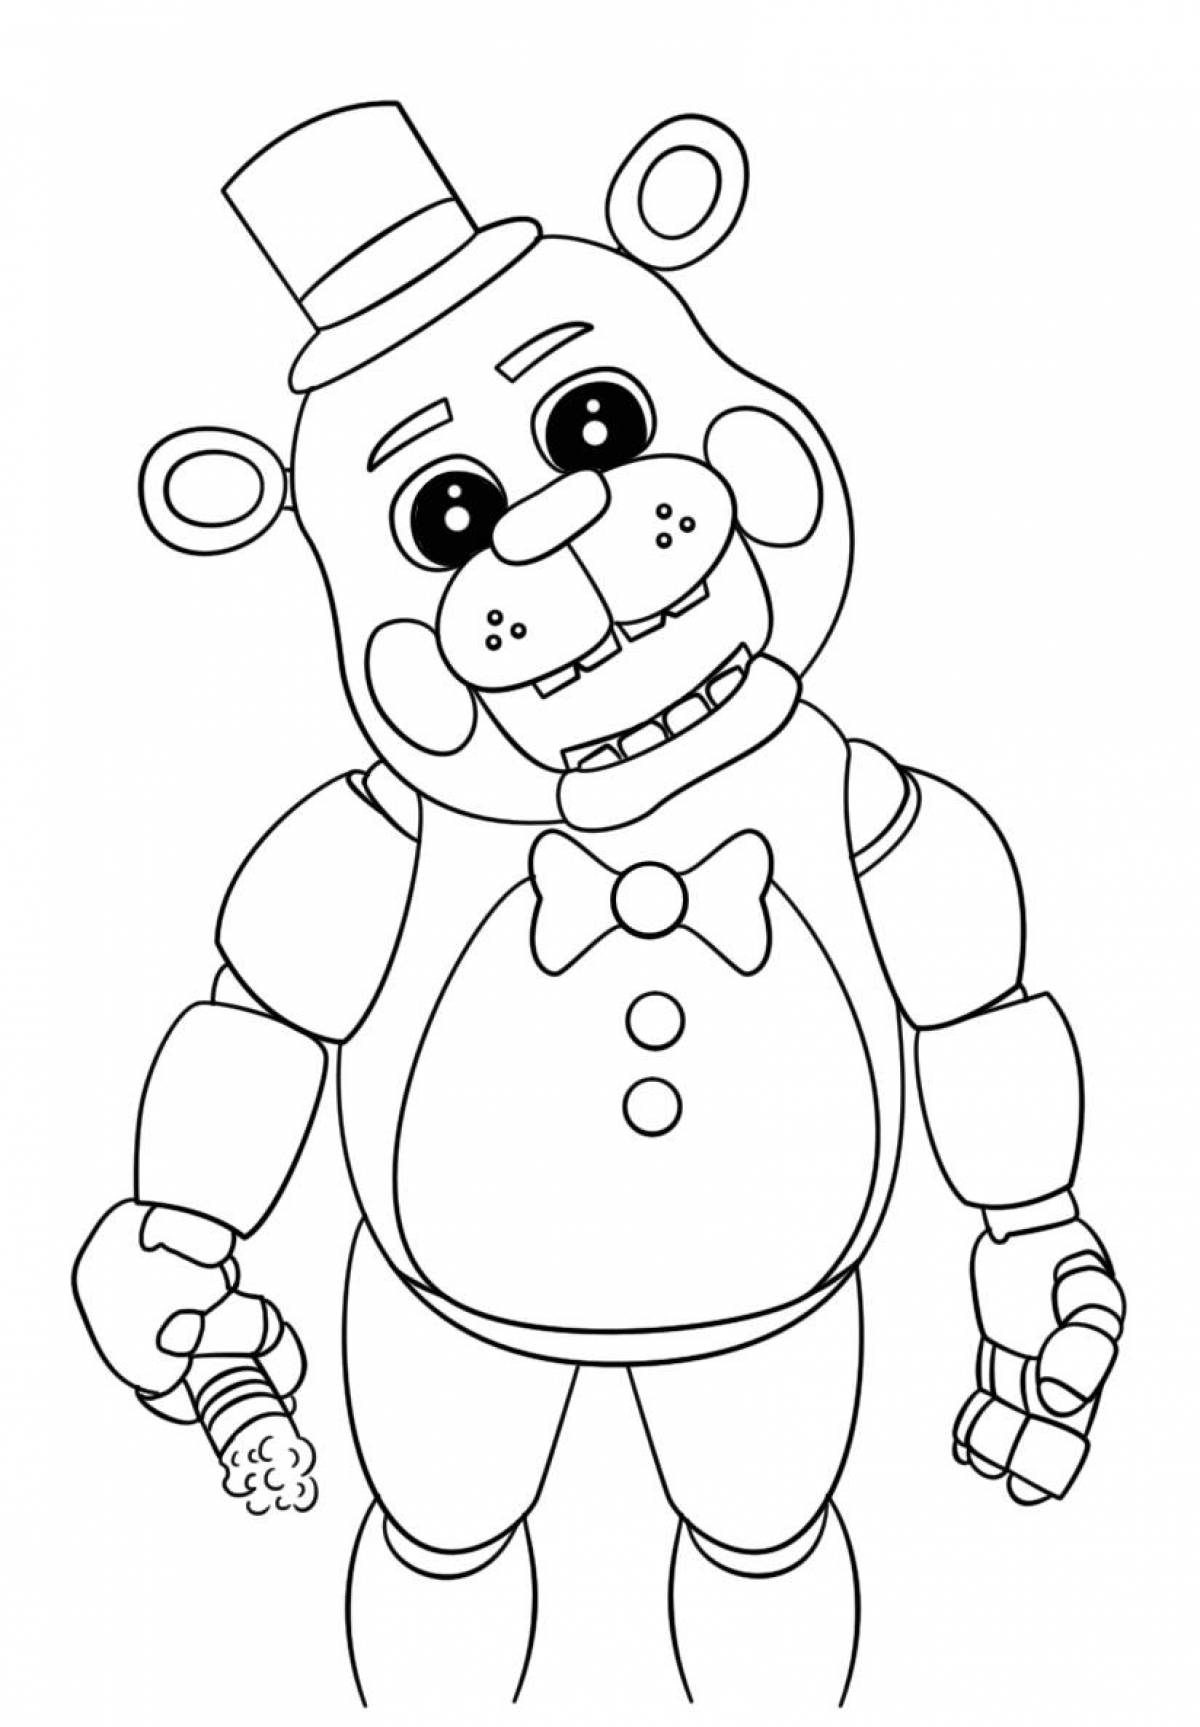 Colorful animatronics coloring page for friends